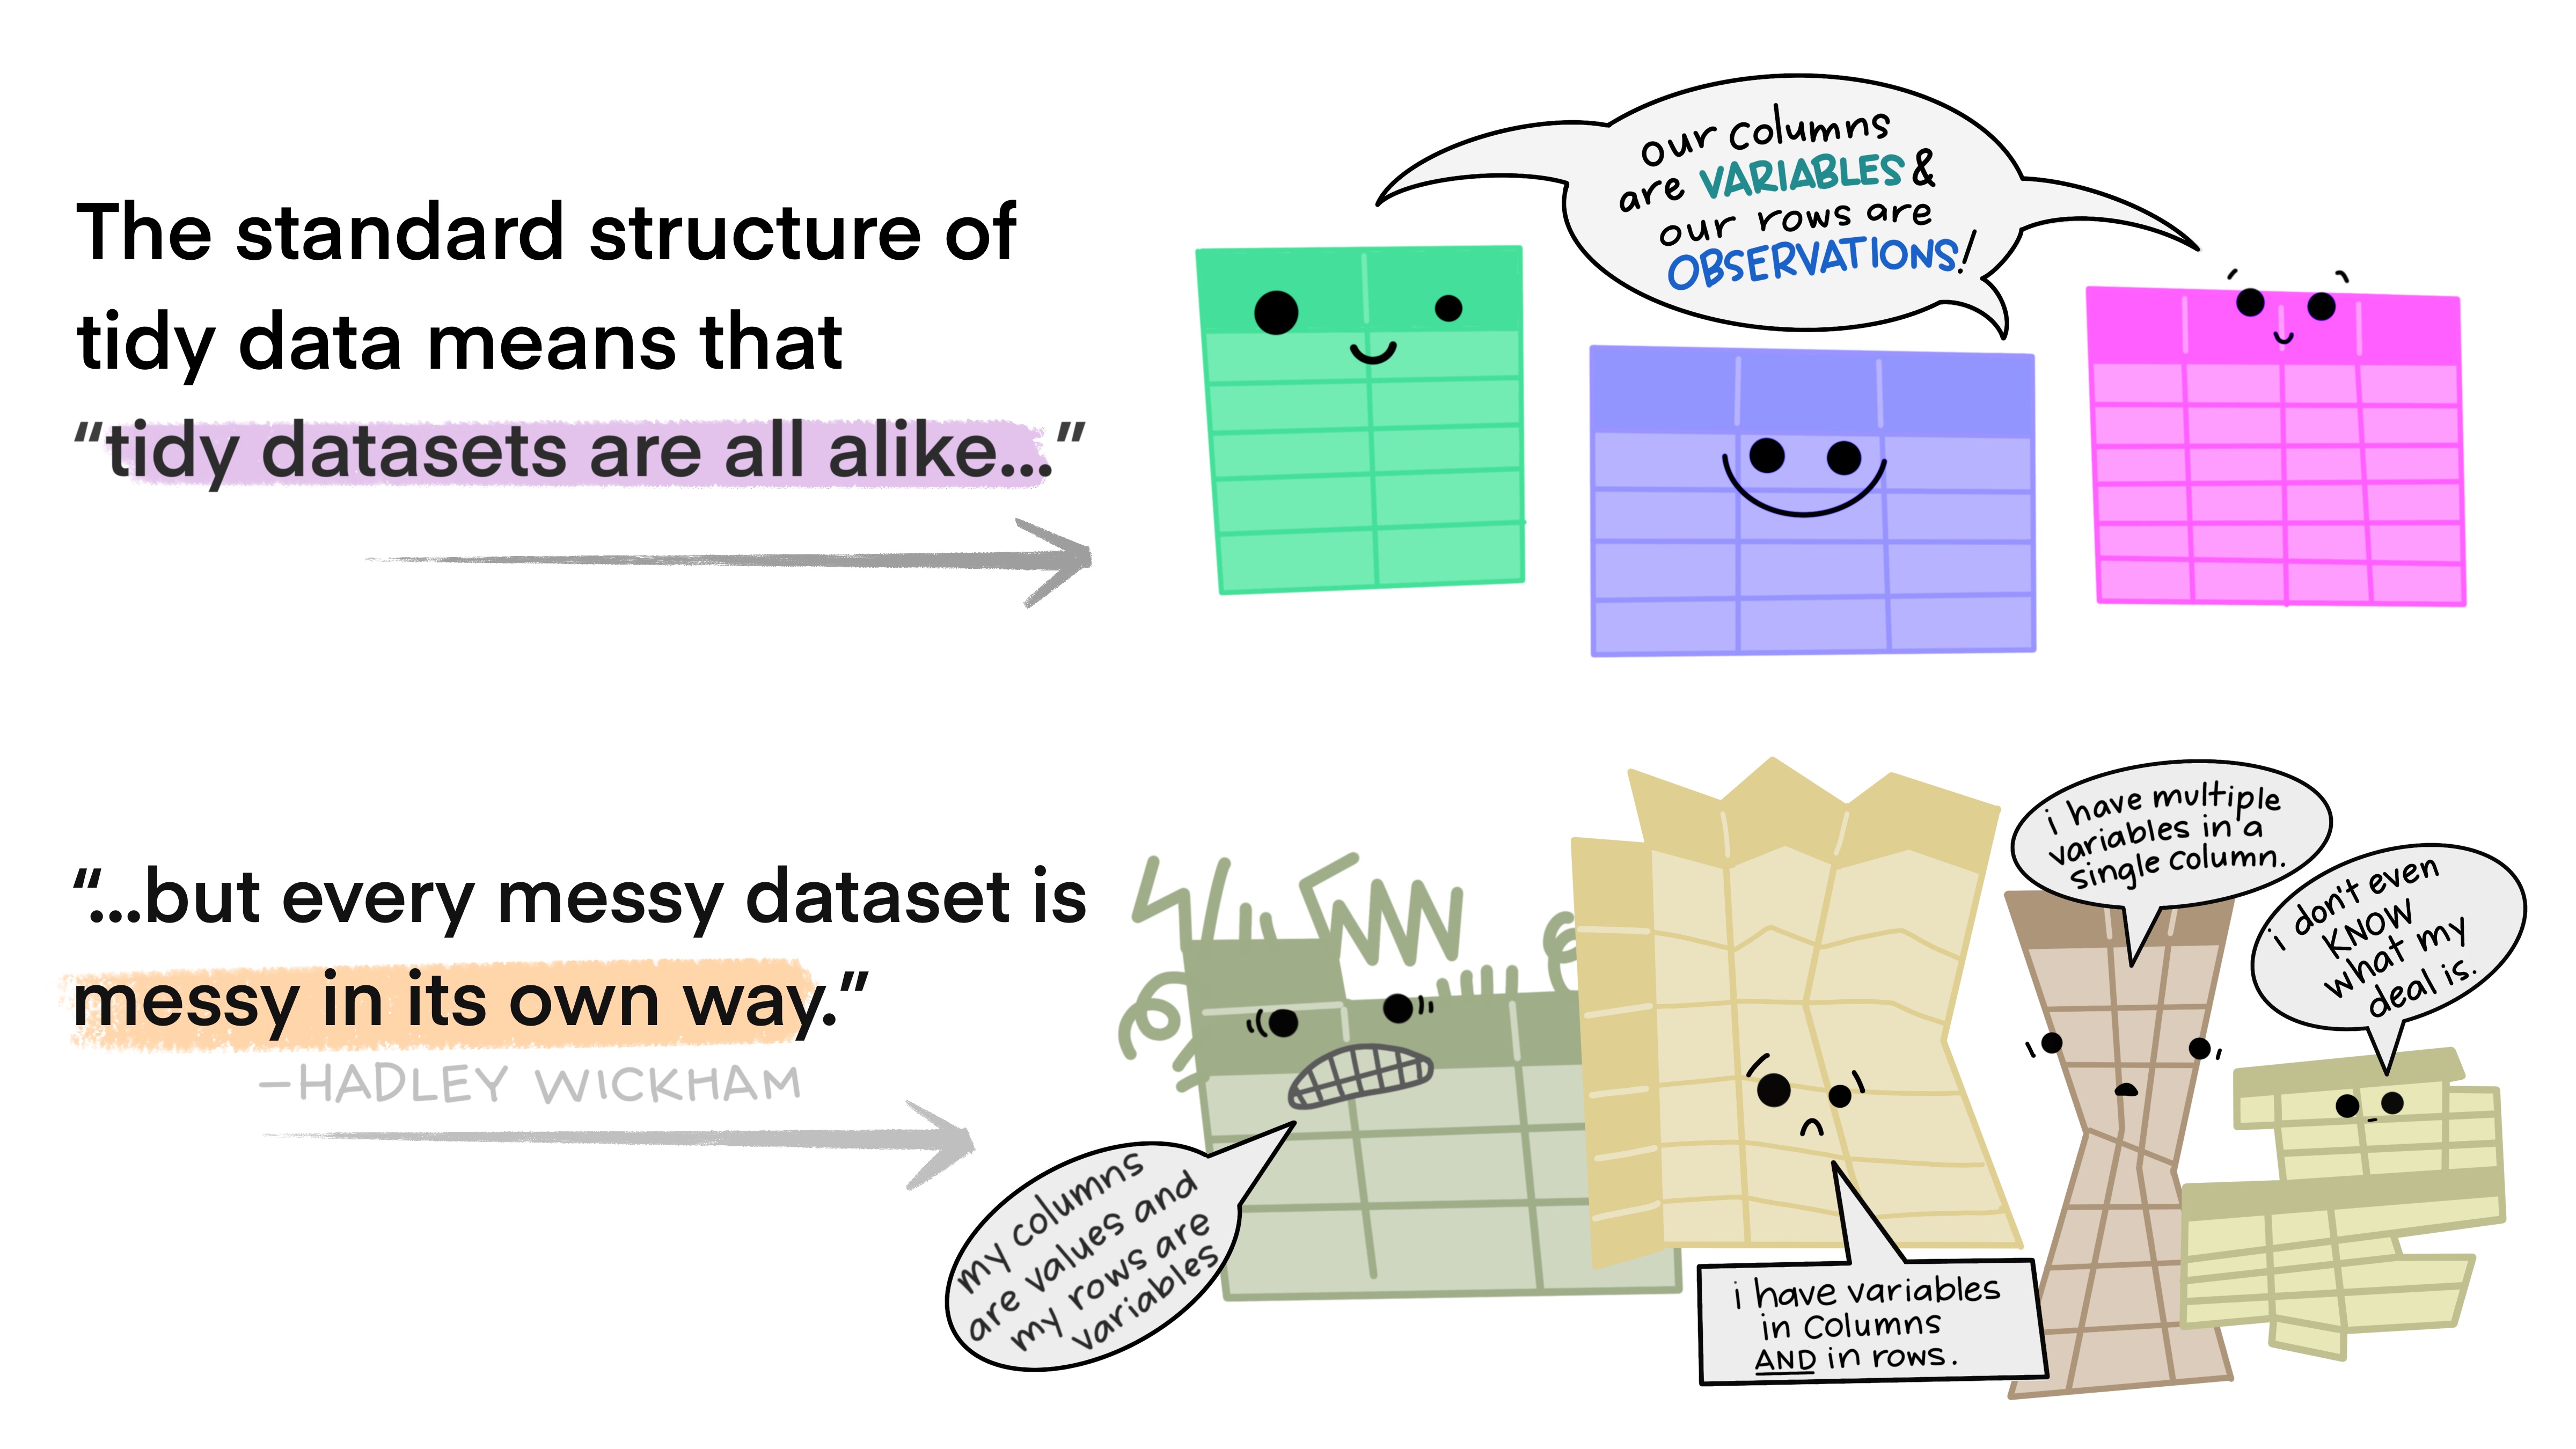 tidy and messy datasets